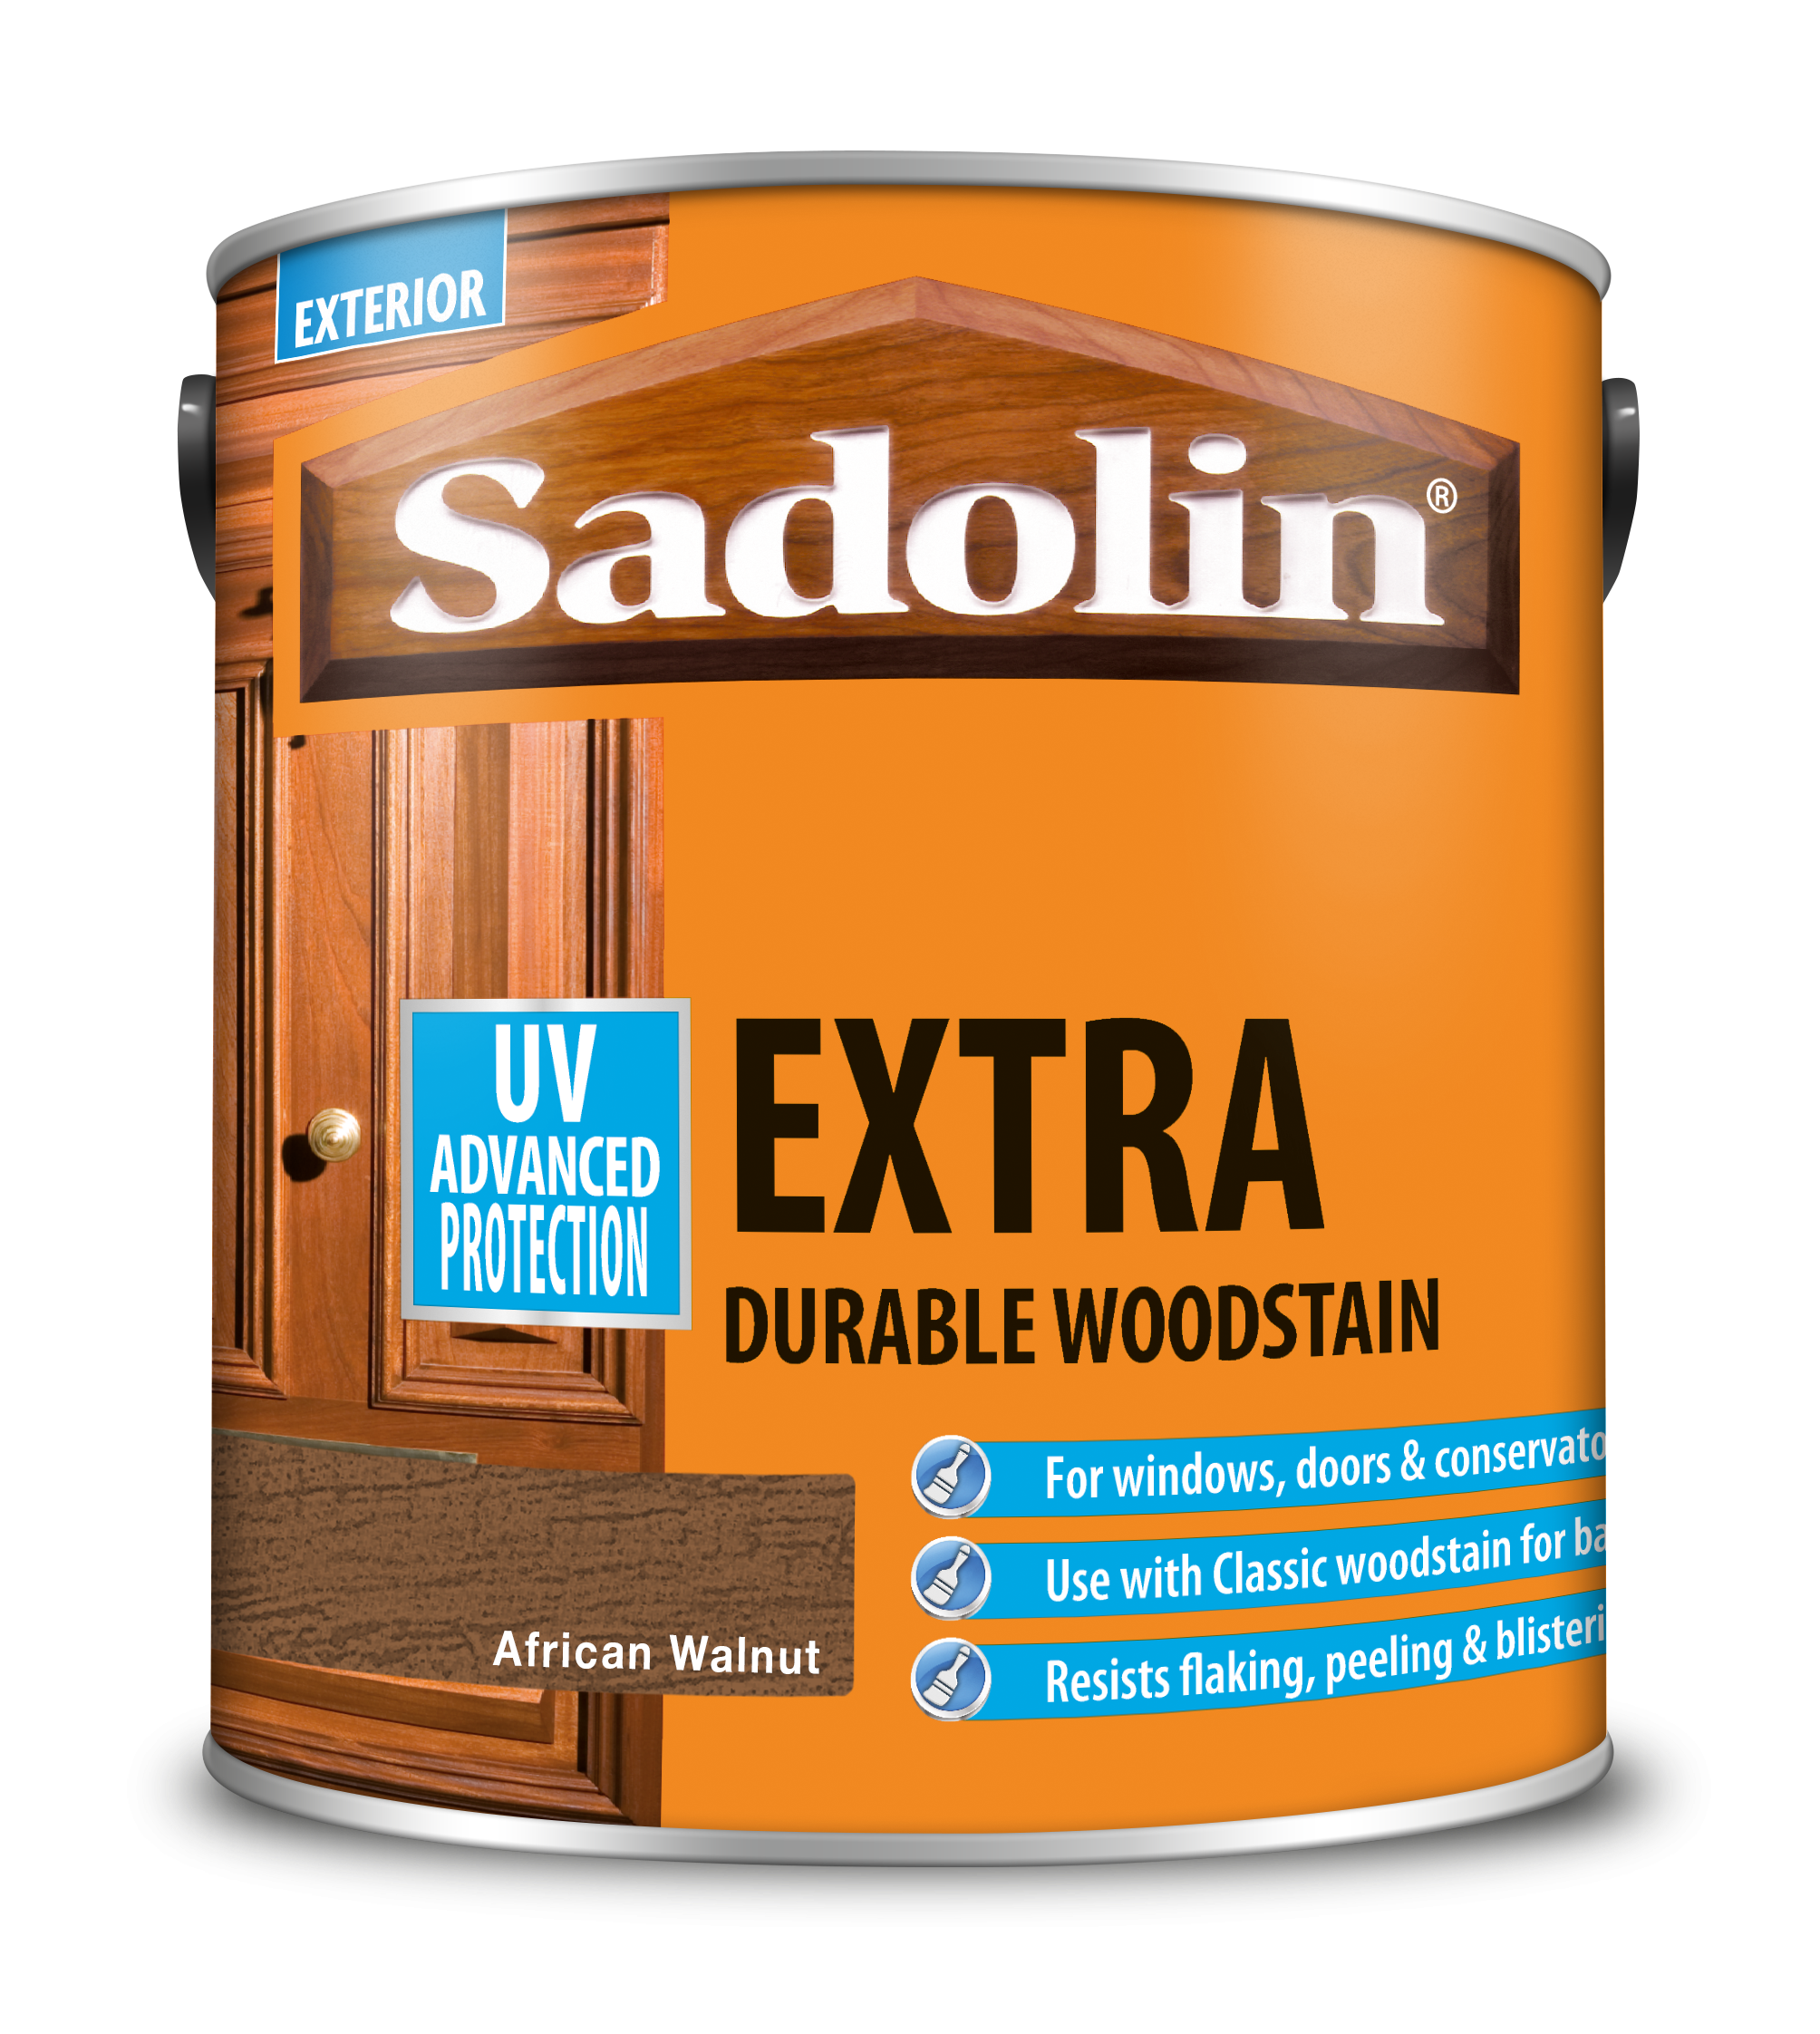 Sadolin Extra Durable Woodstain African Walnut 2.5L [MPPSSV0]  5028556